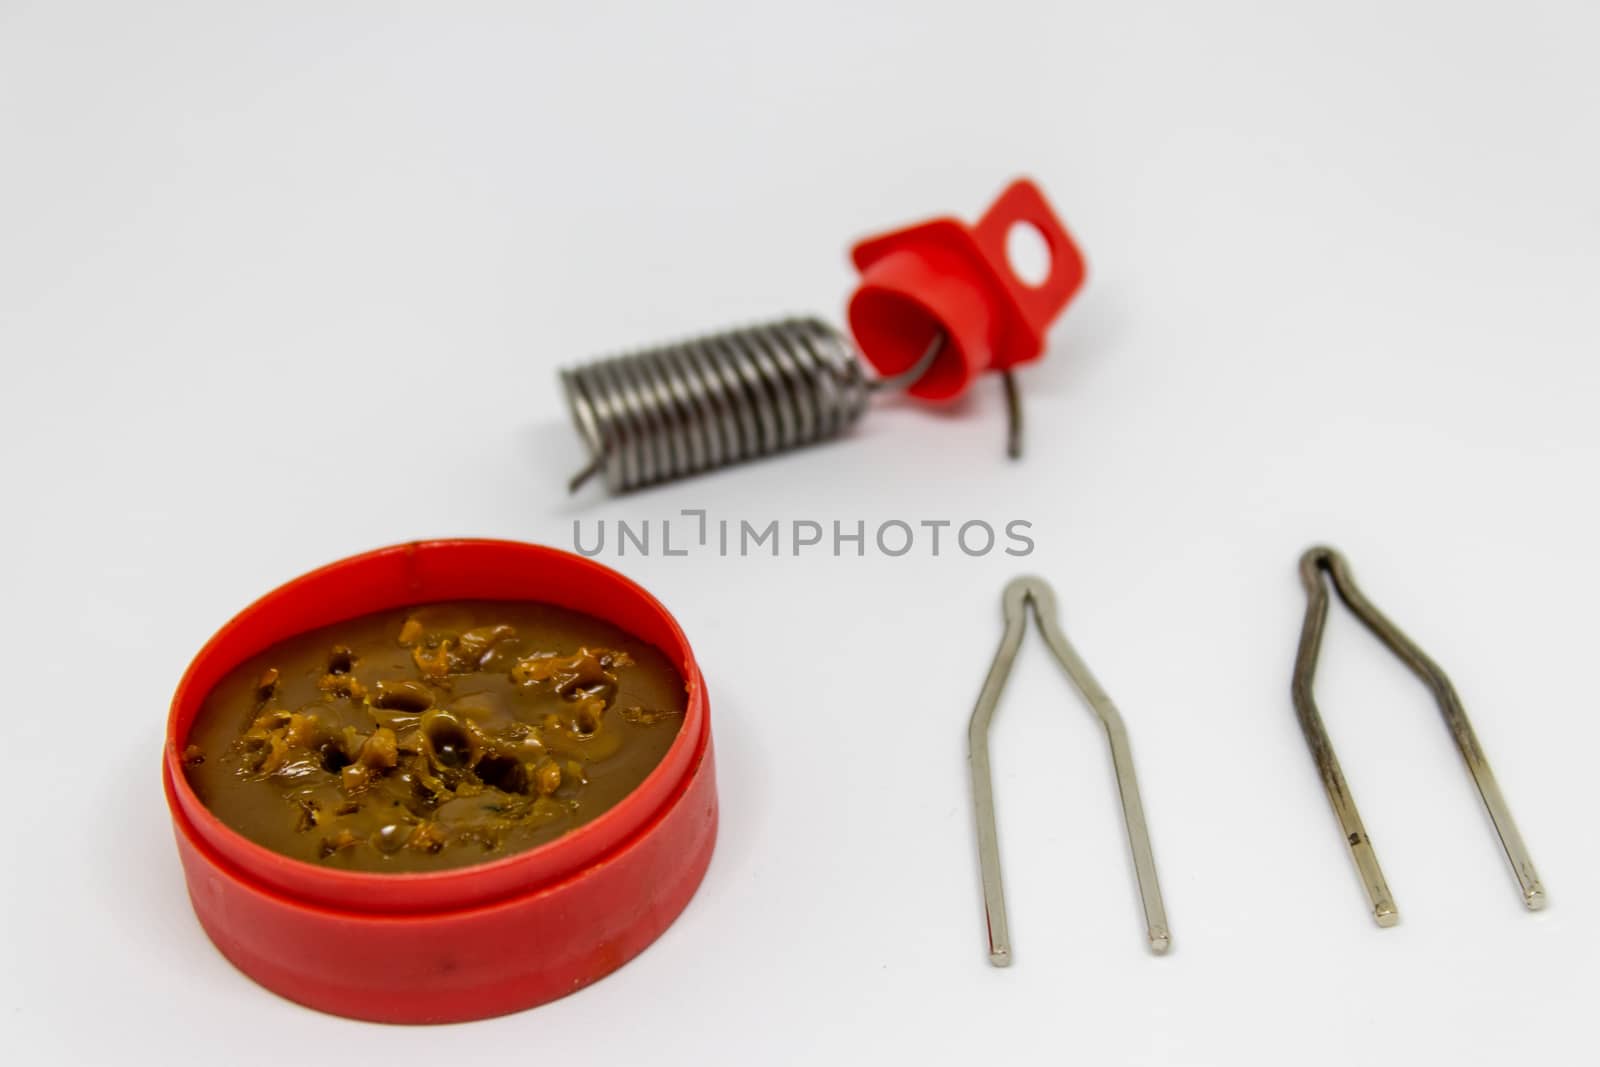 coil spring and grease oil closeup shoot with white background. photo has taken as product photo focus on grease.